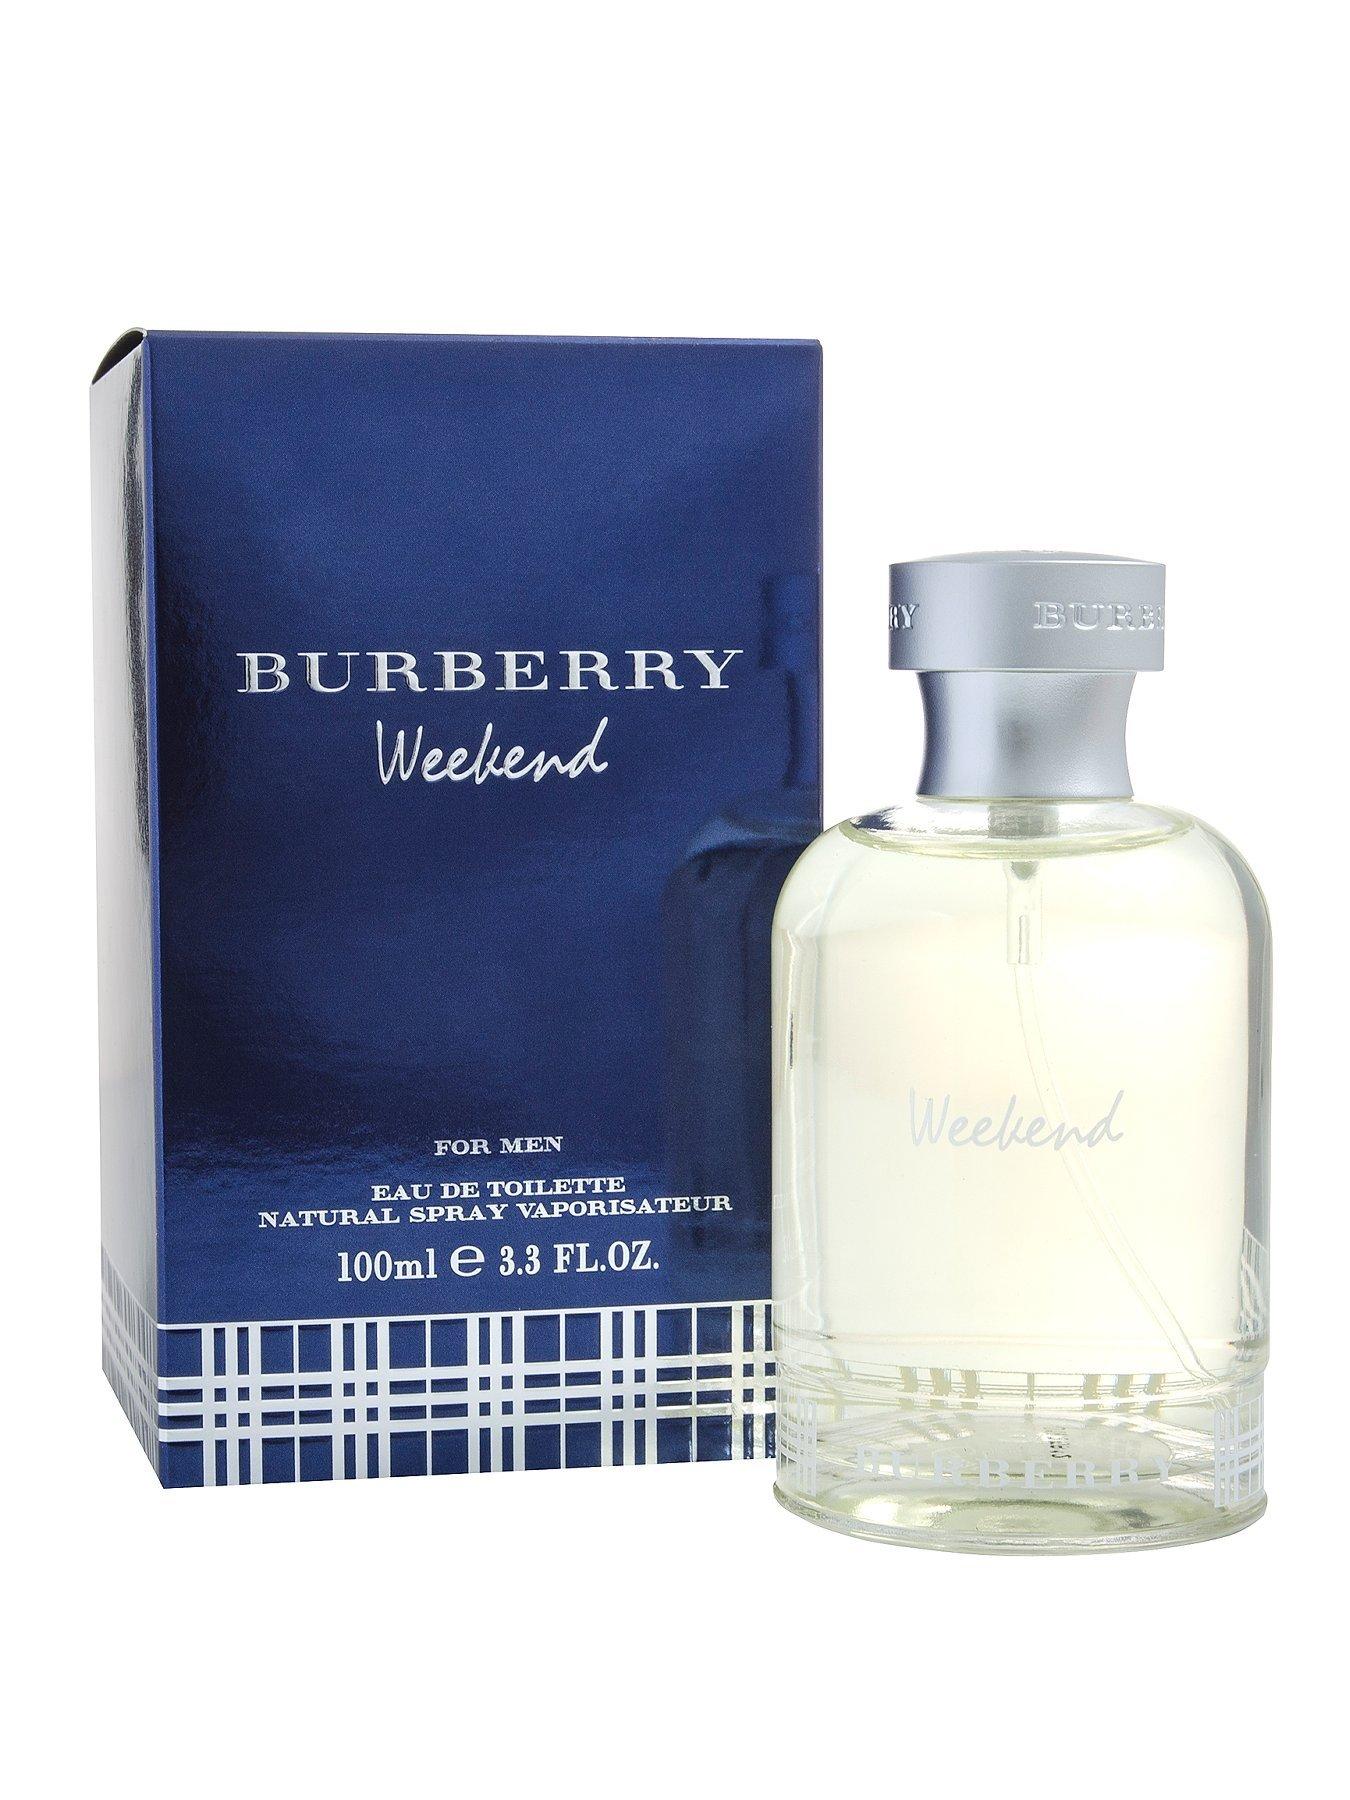 burberry weekend for men smell